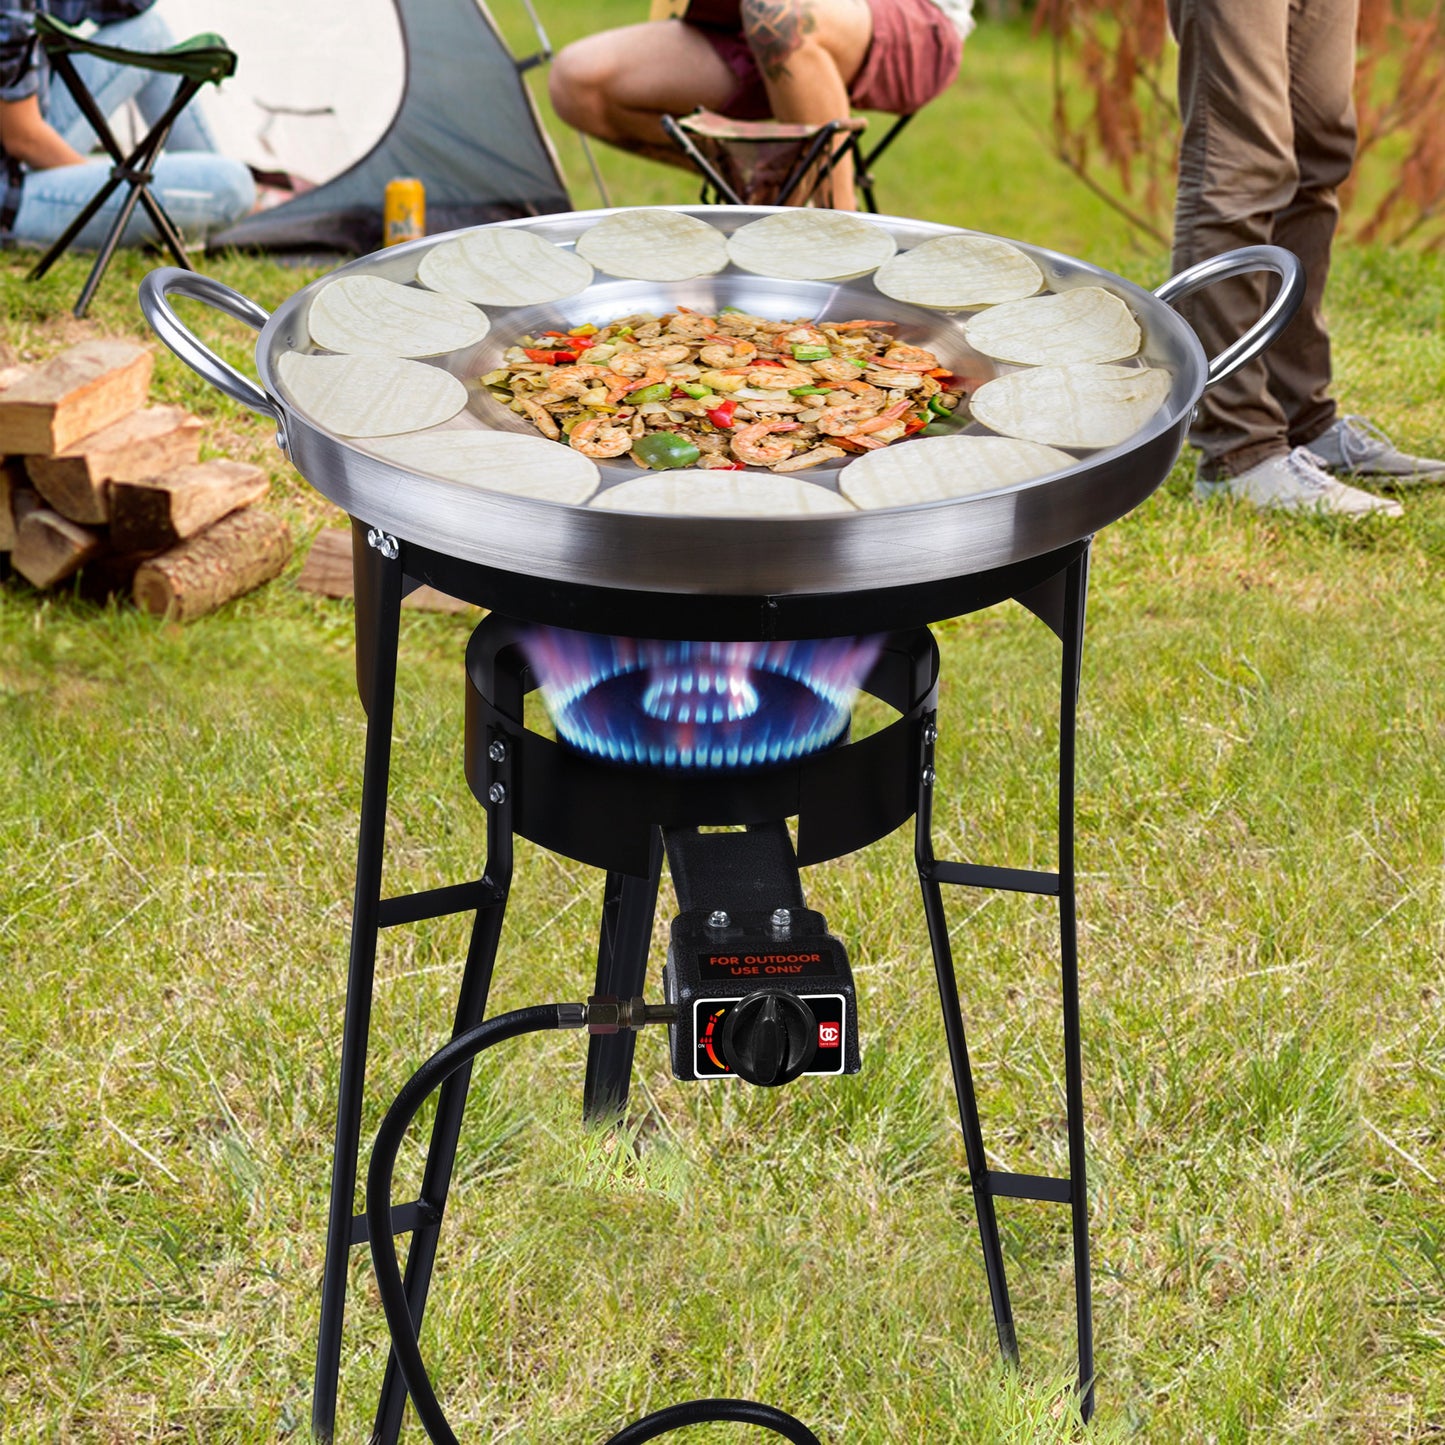 
                  
                    Bene Casa cast-iron Propane Burner with Stand & Comal Set (Party Size)
                  
                